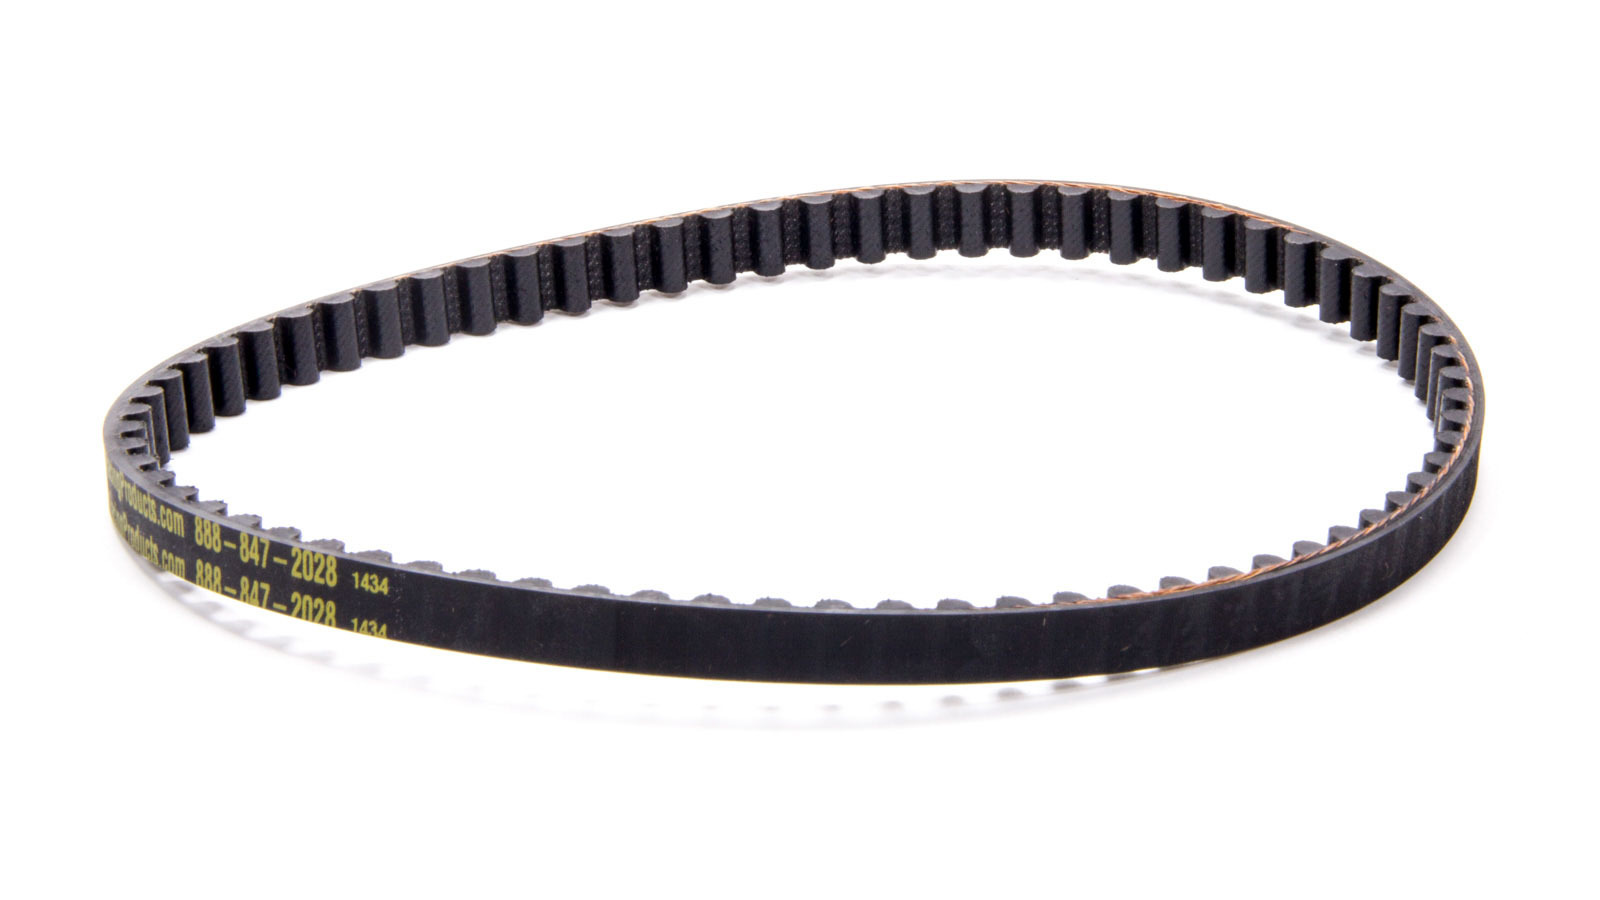 Jones Racing Products 640-10HD HTD Drive Belt, 25.200 in Long, 10 mm Wide, 8 mm Pitch, Each